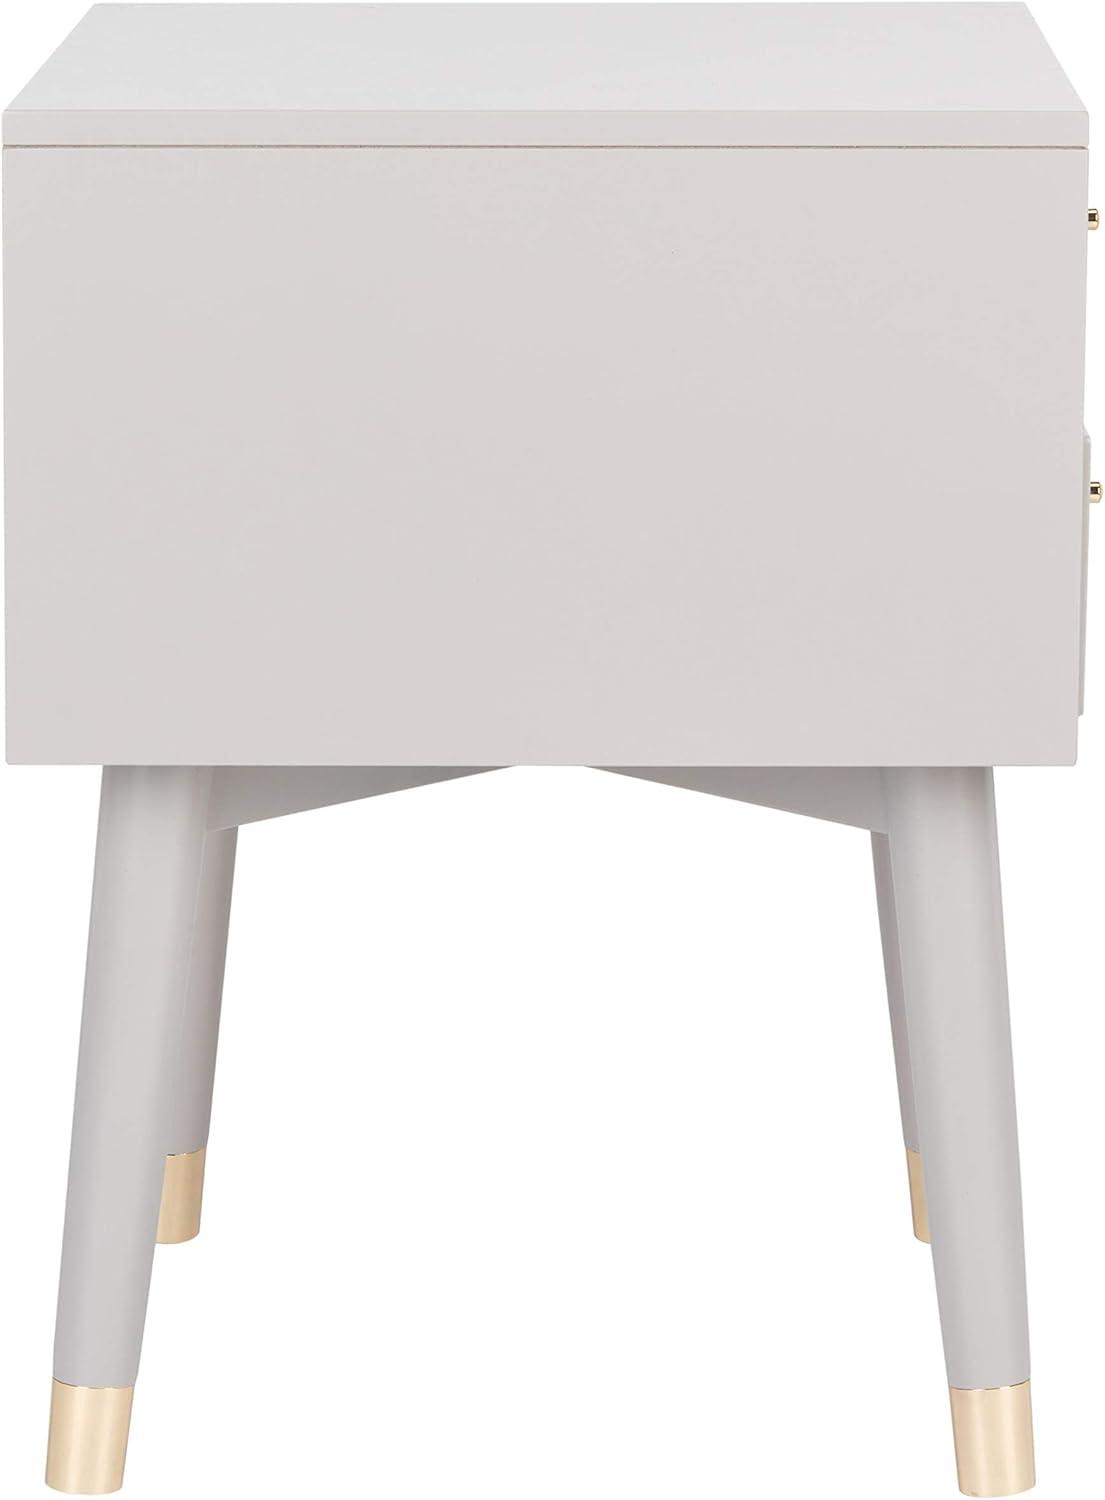 Retro Grey and Gold 2-Drawer 26" Nightstand with Metallic Accents